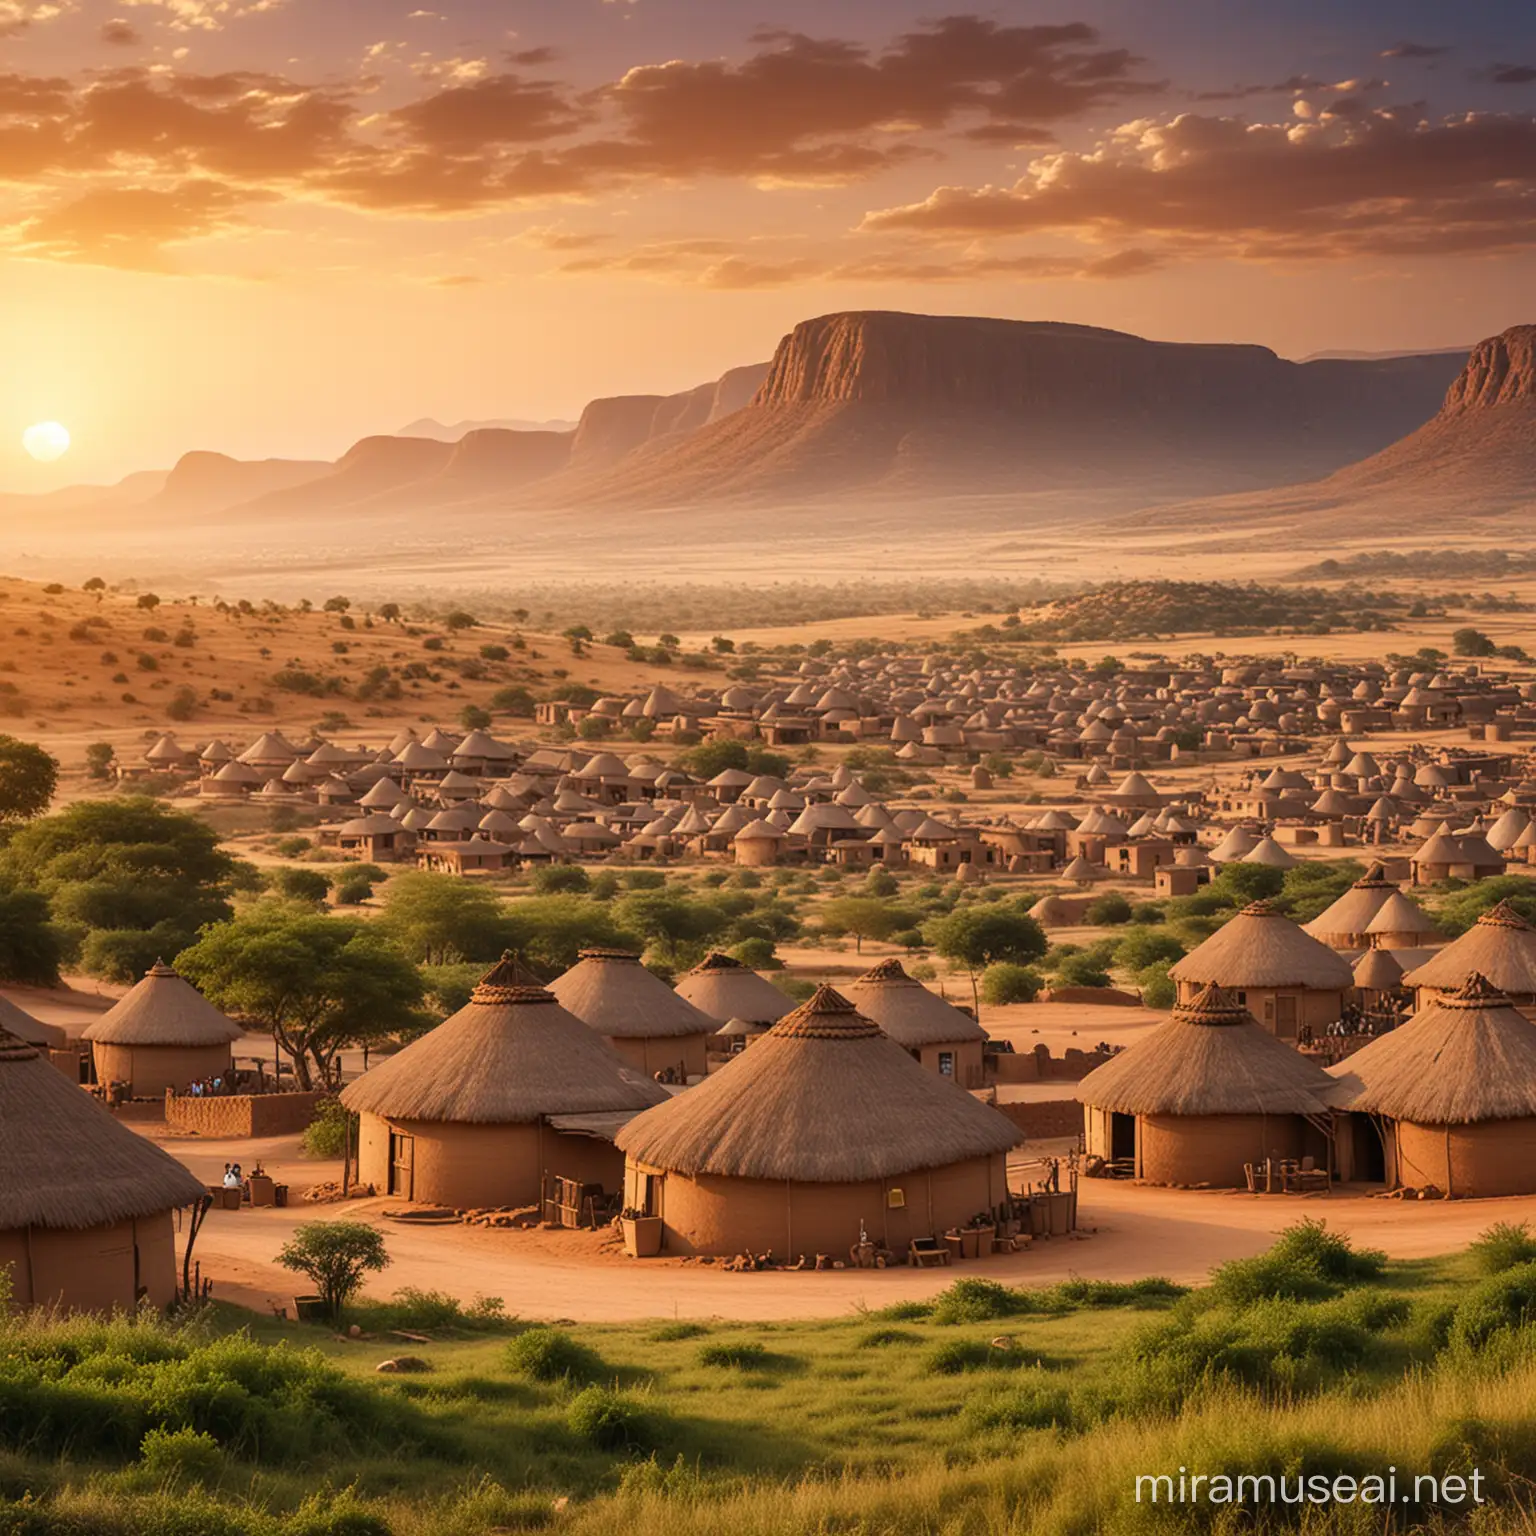 vintage african village with hilly background at sunset
